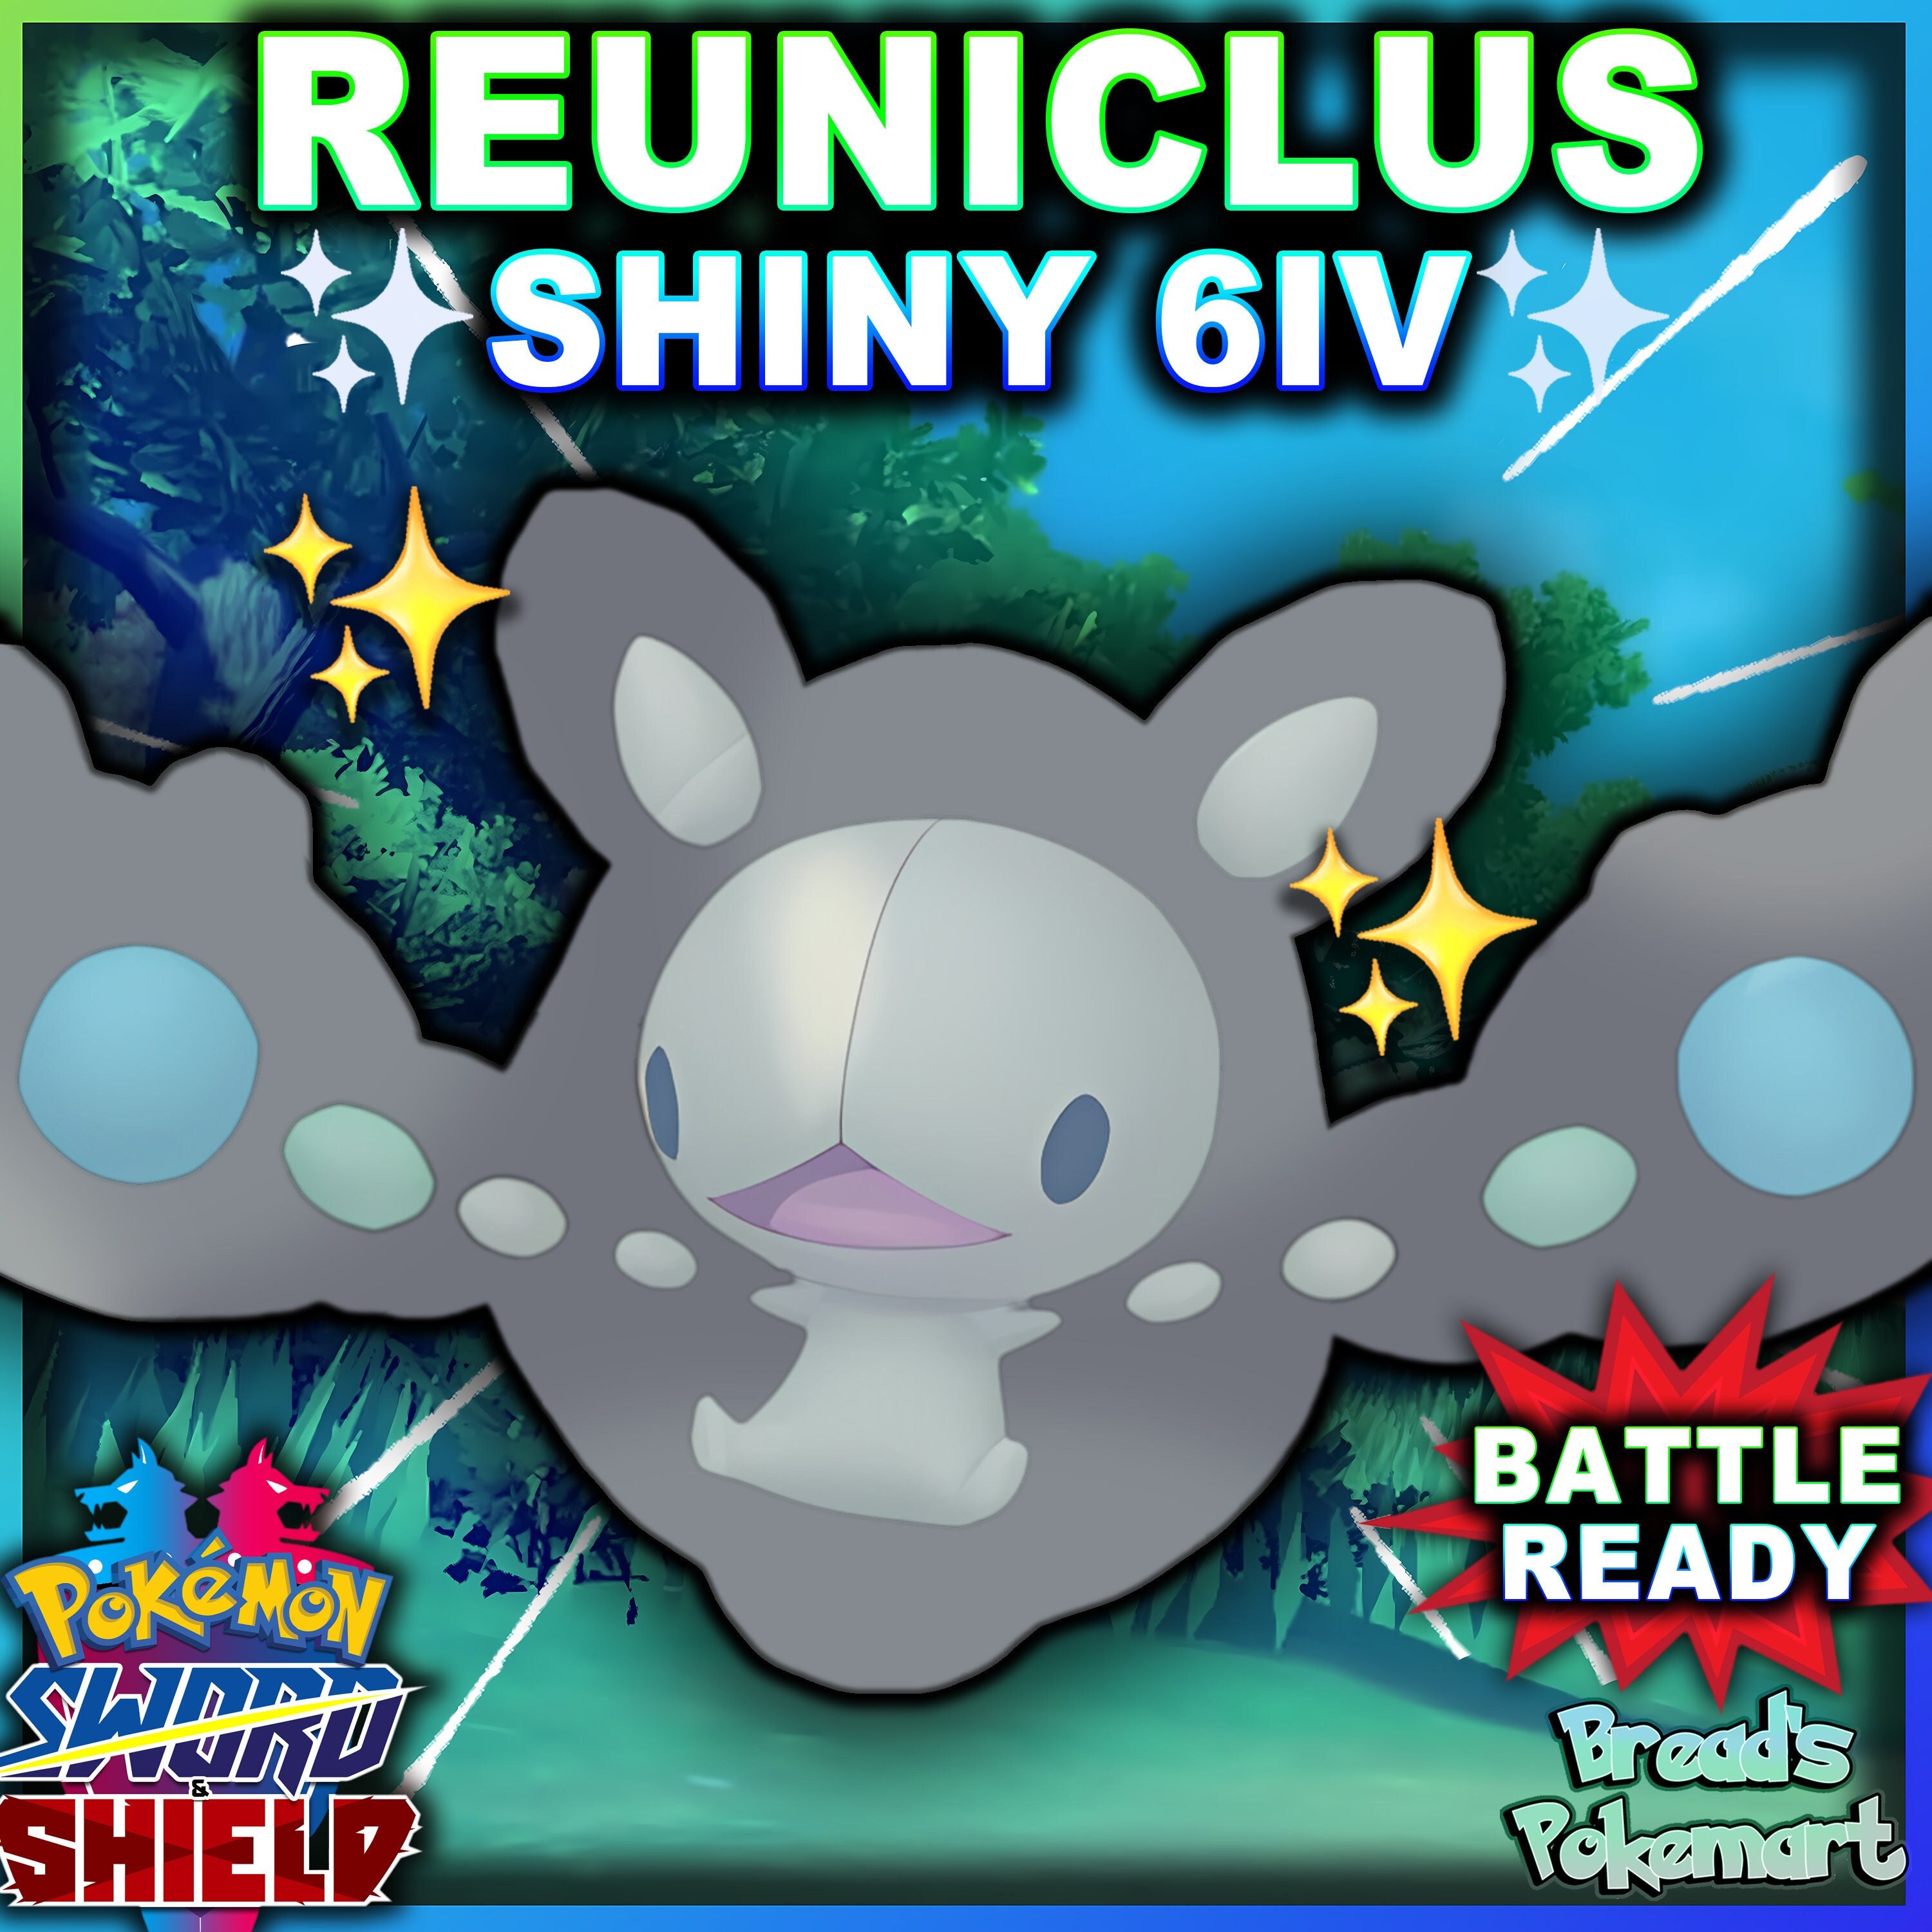 Shiny 6IVs Pack! Every Ultra Beast + Free items for Pokemon Sword/Shield